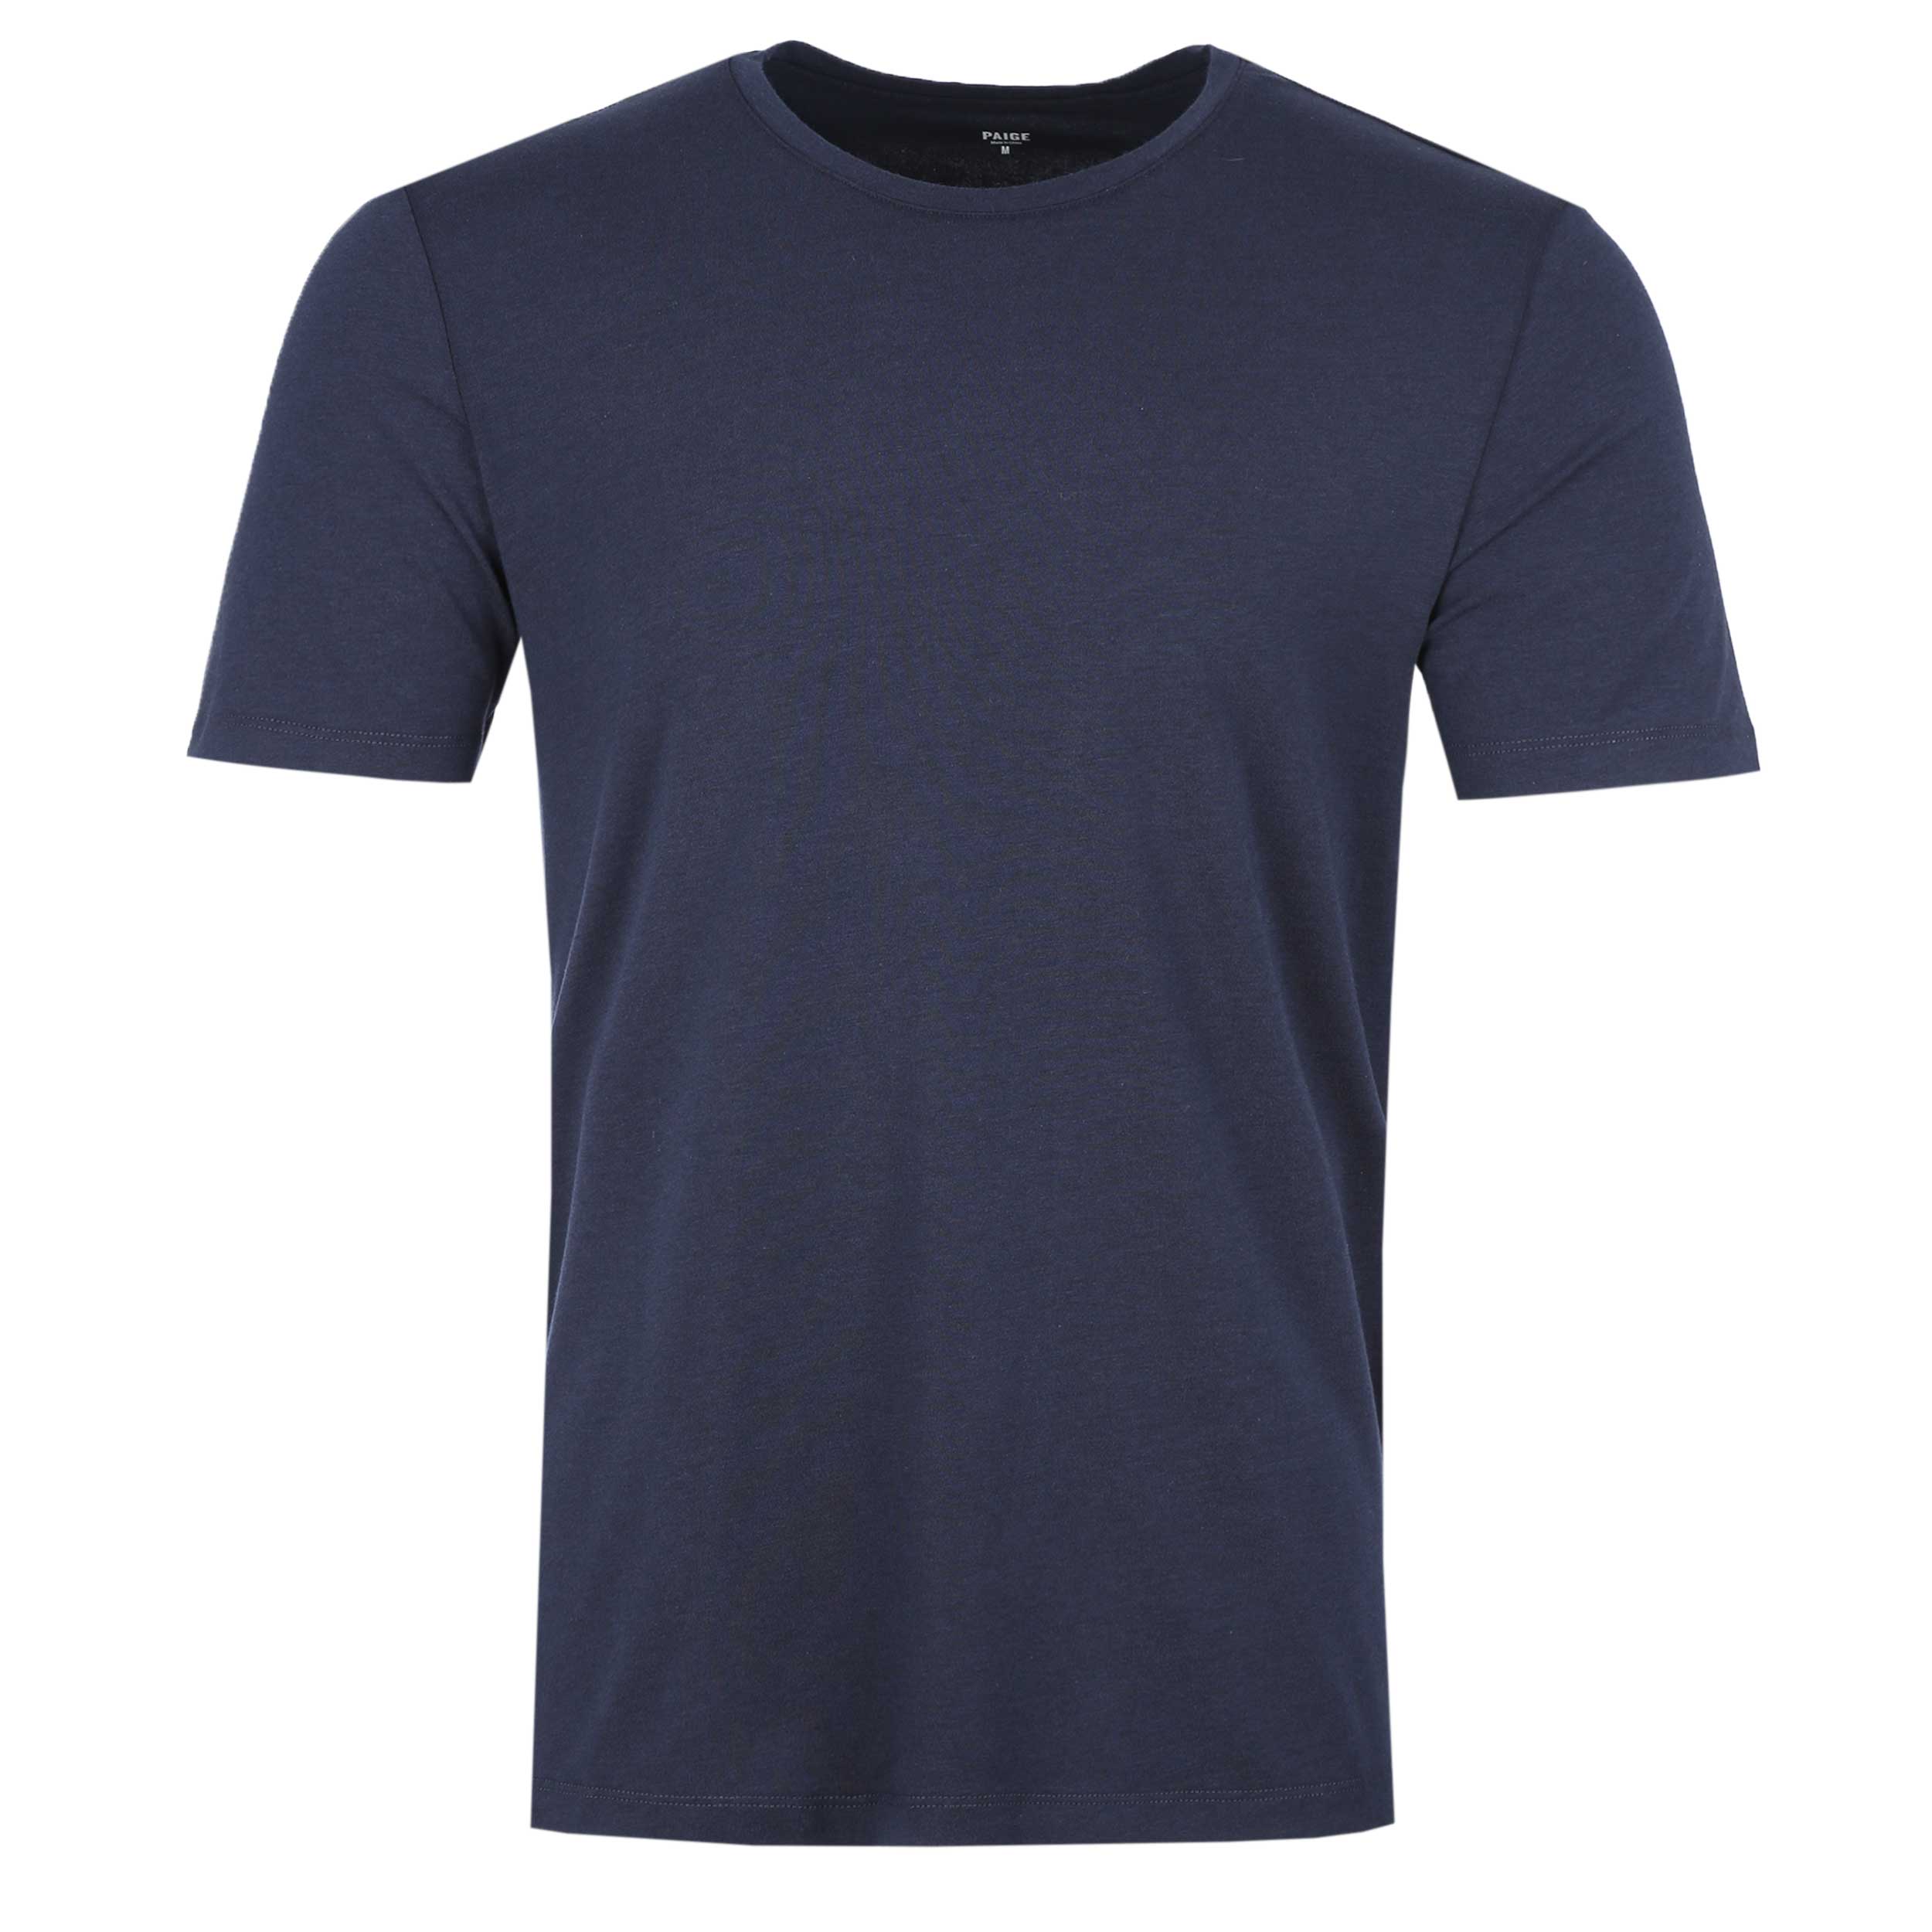 Paige Cash T Shirt in Navy